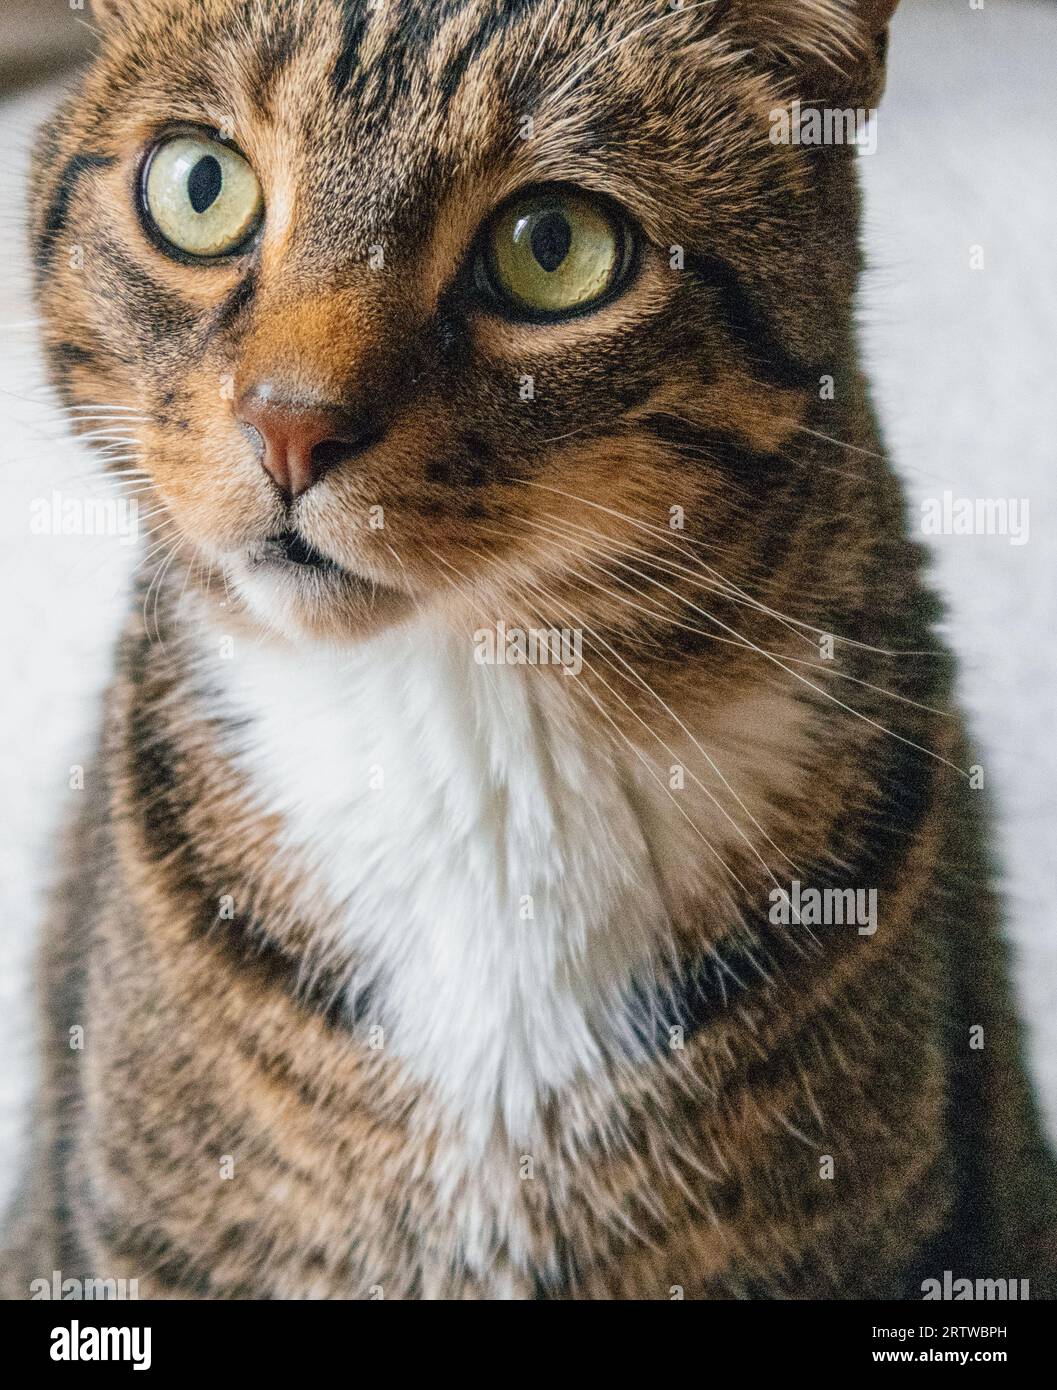 Close-up of a tabby cat with green eyes Stock Photo